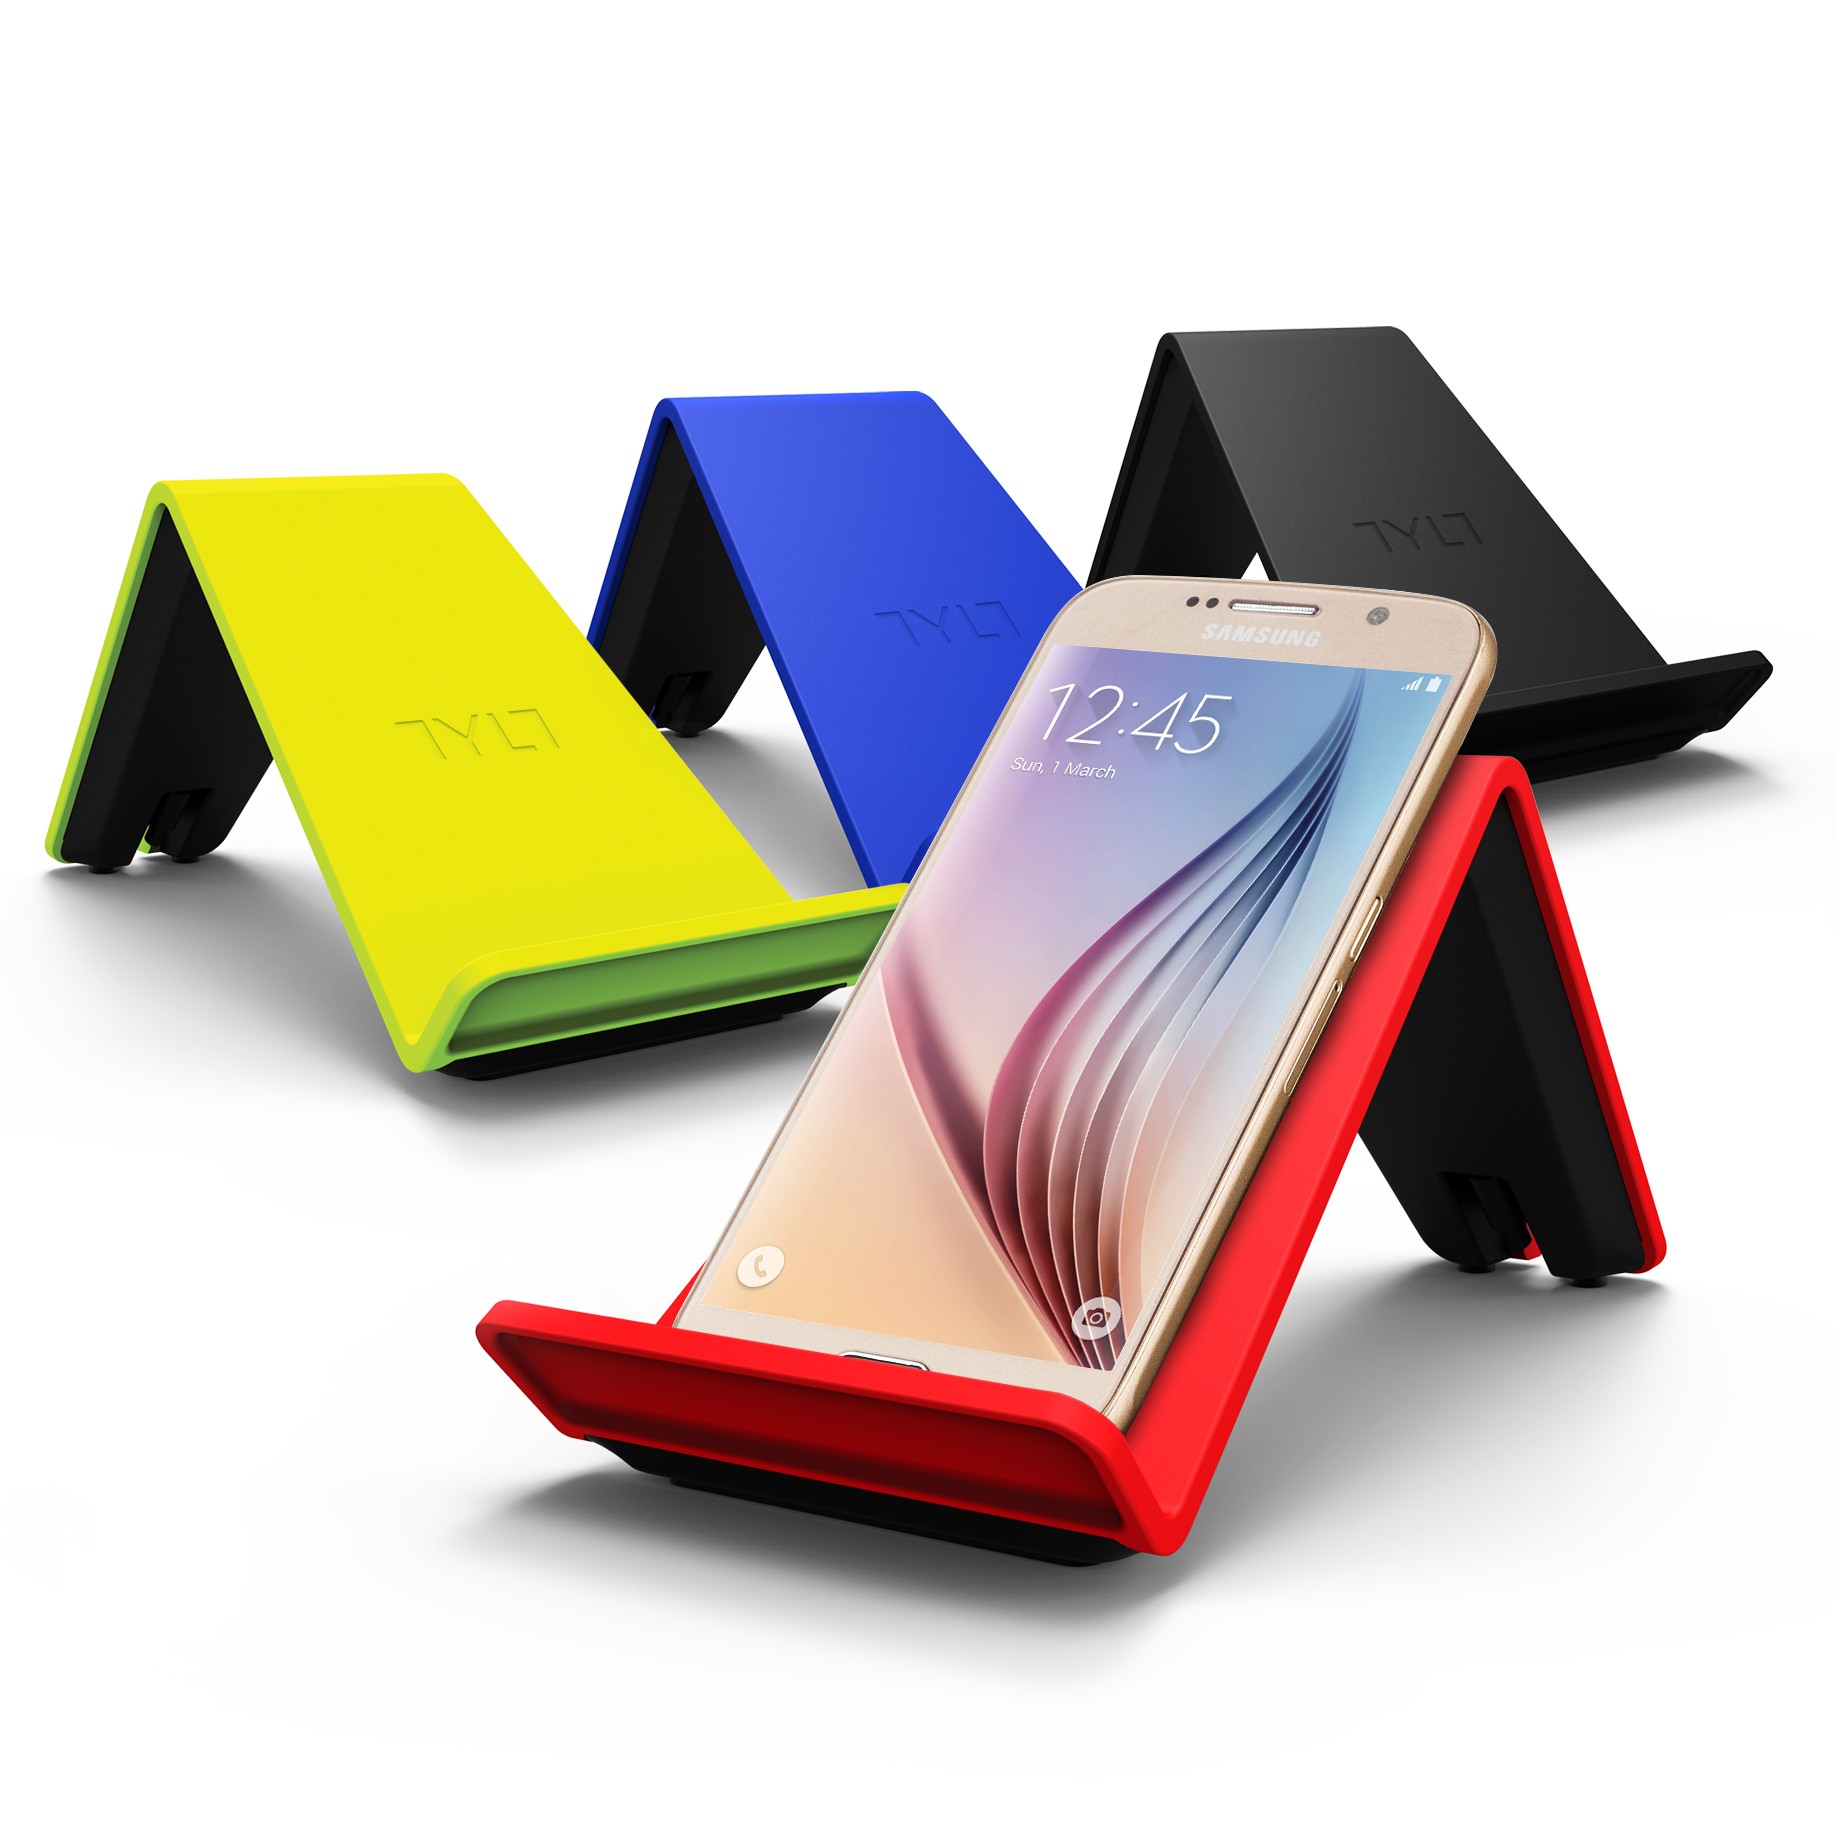 vu-wireless-charger-group-s6-square.jpg